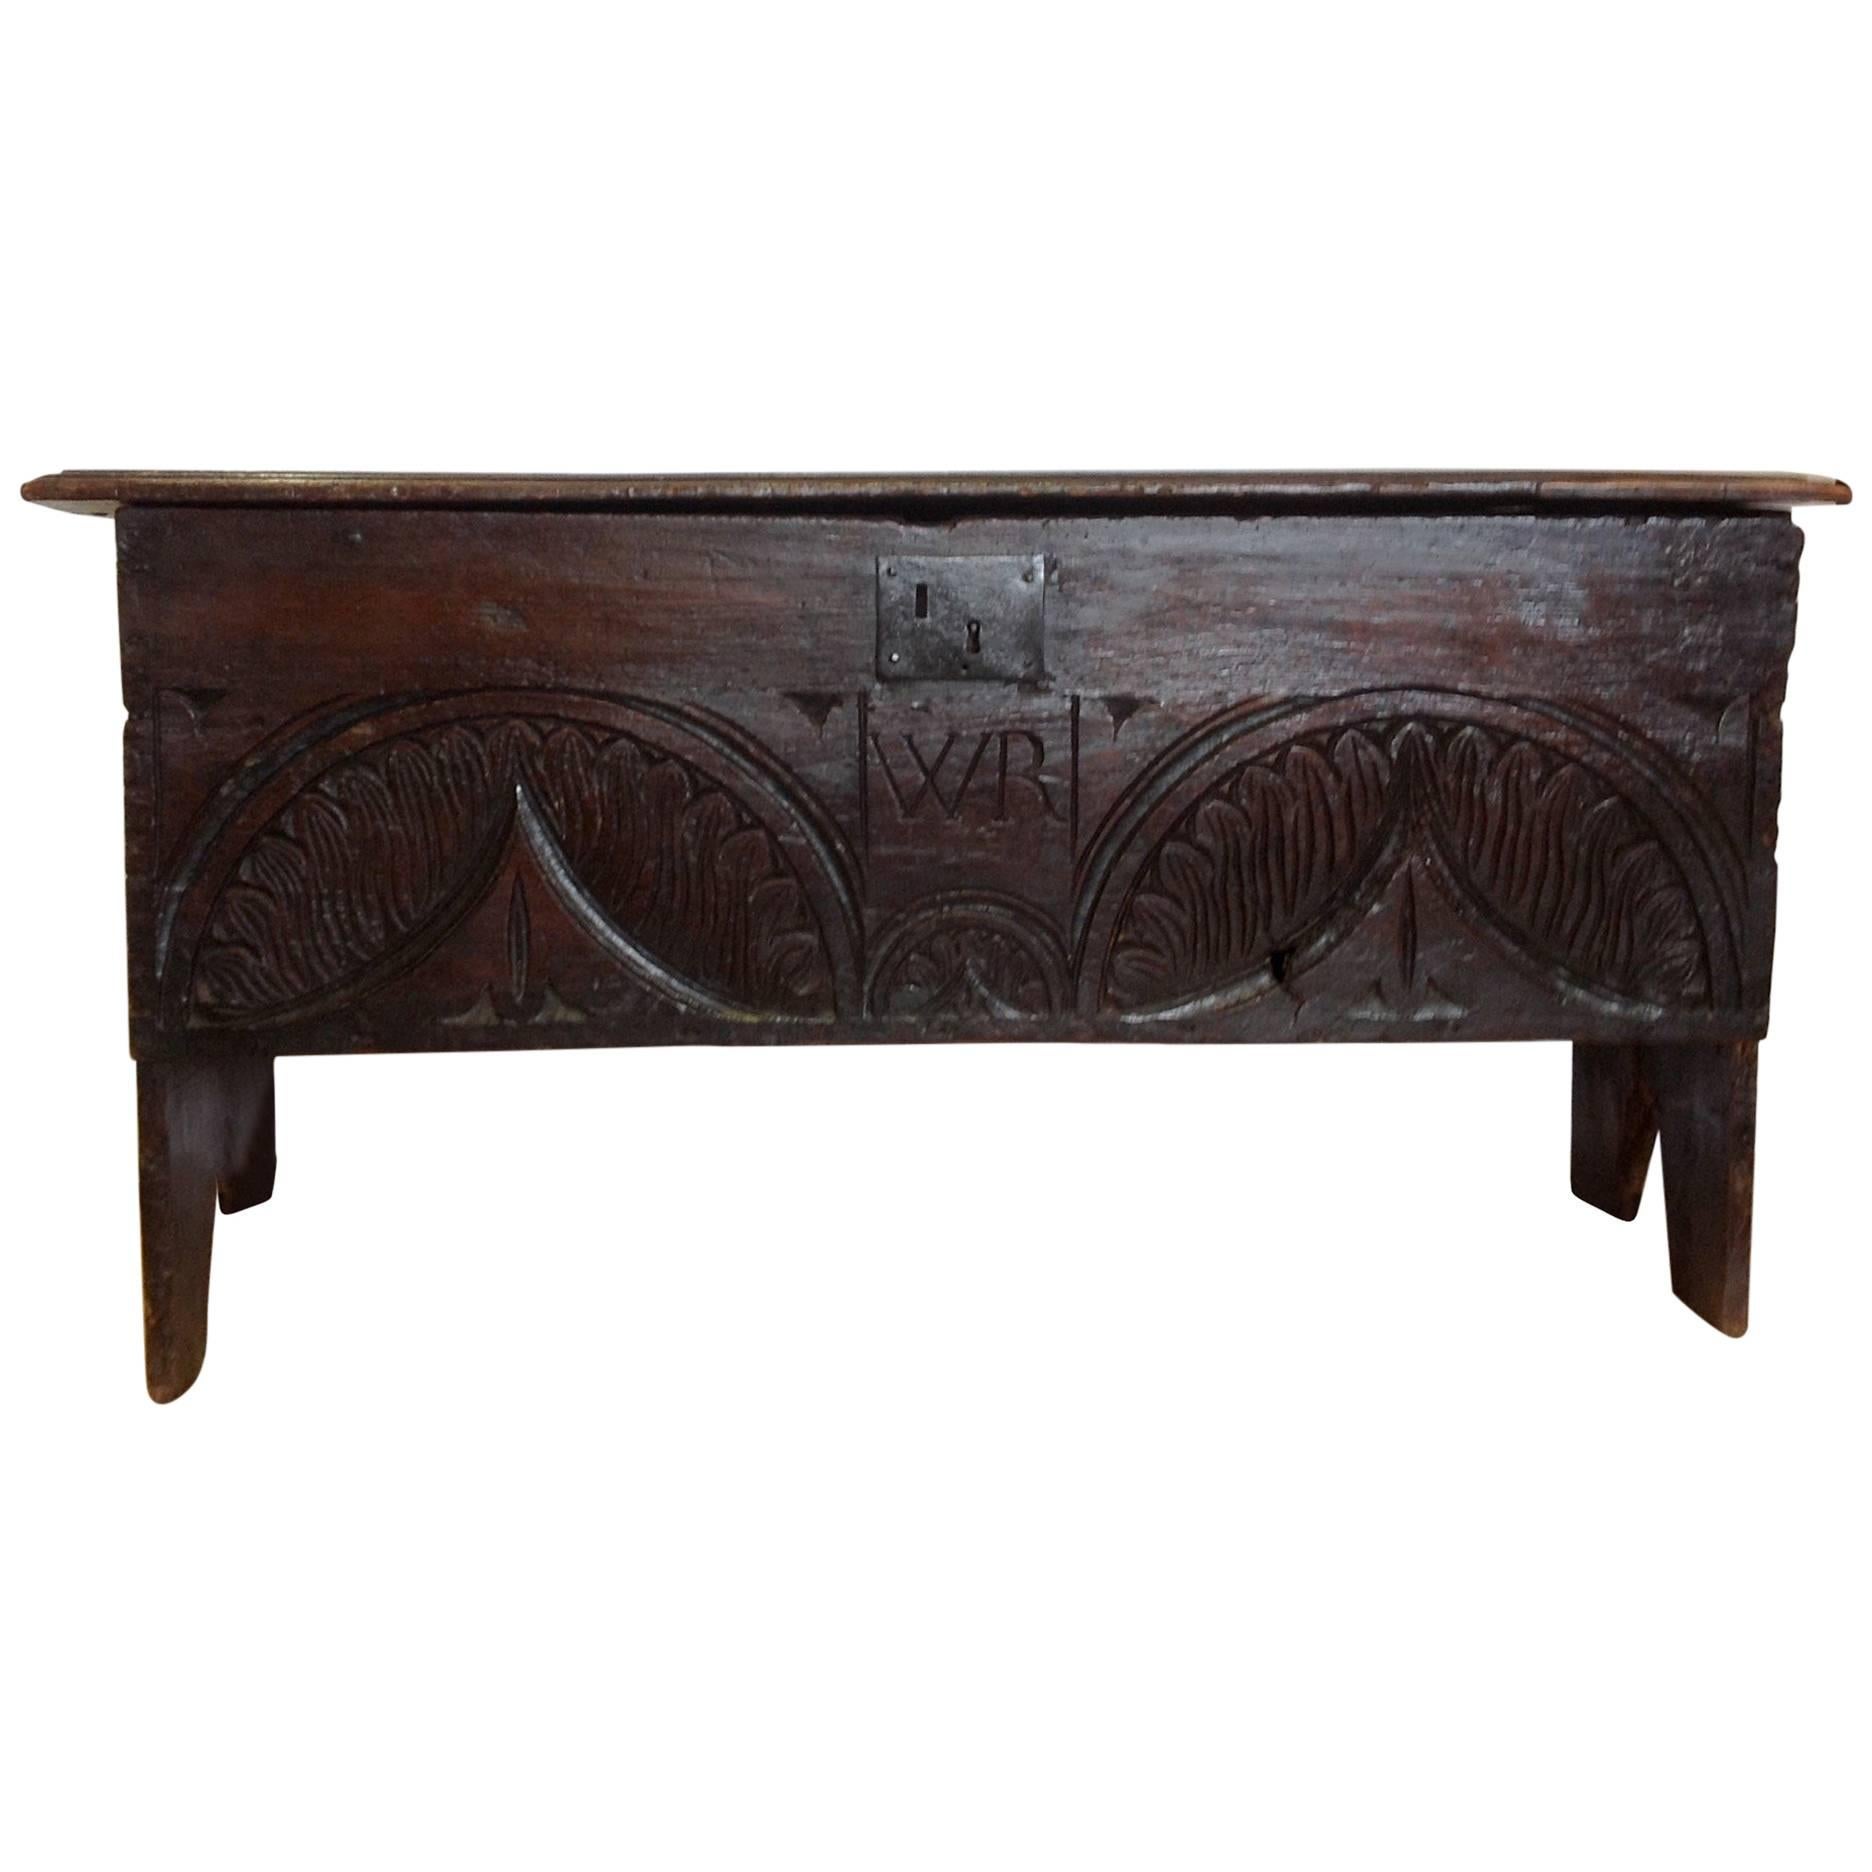 Antique English Carved Wooden Blanket Chest, 17th Century For Sale